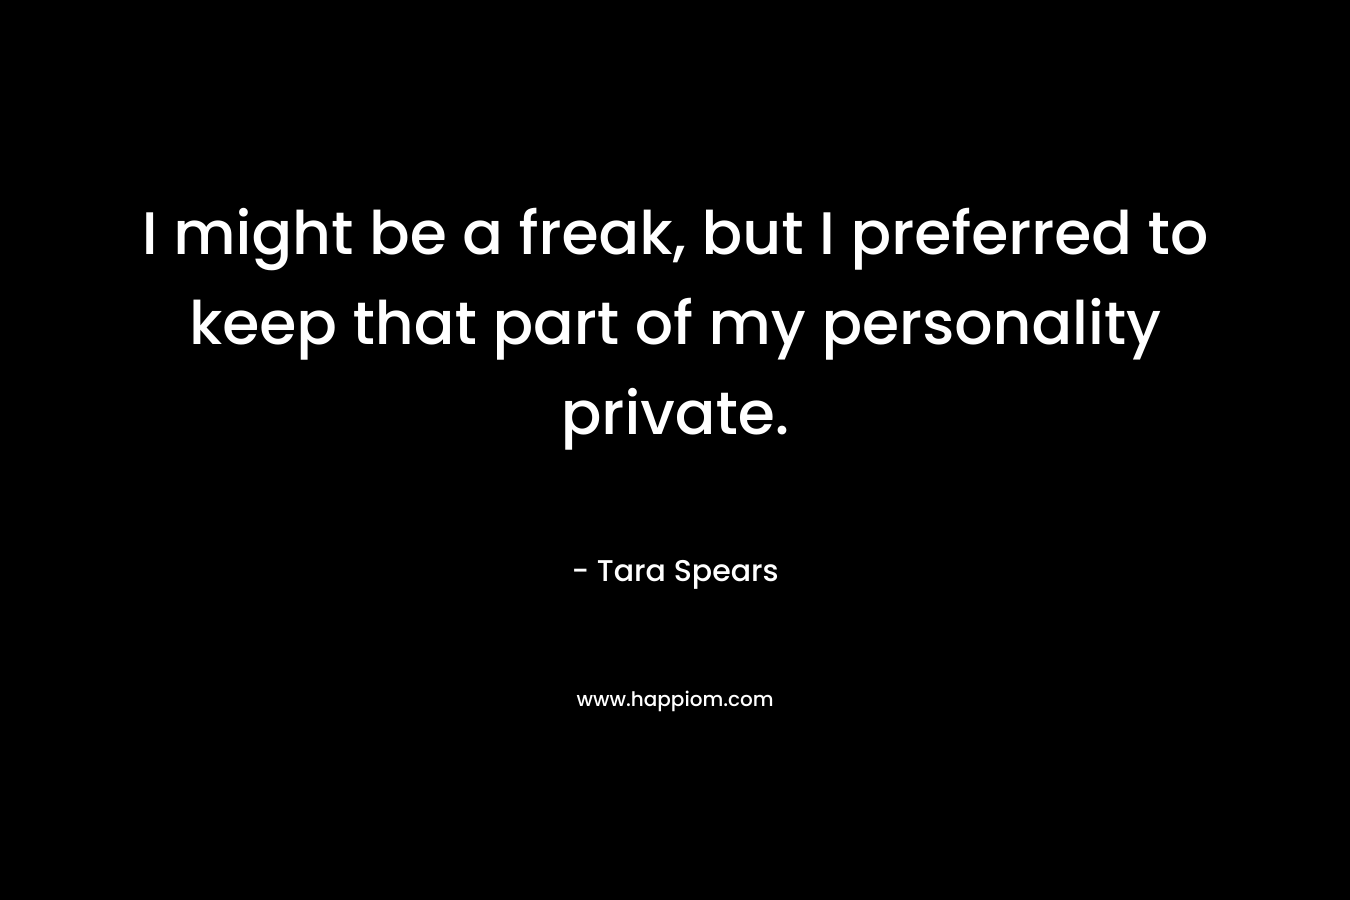 I might be a freak, but I preferred to keep that part of my personality private. – Tara Spears